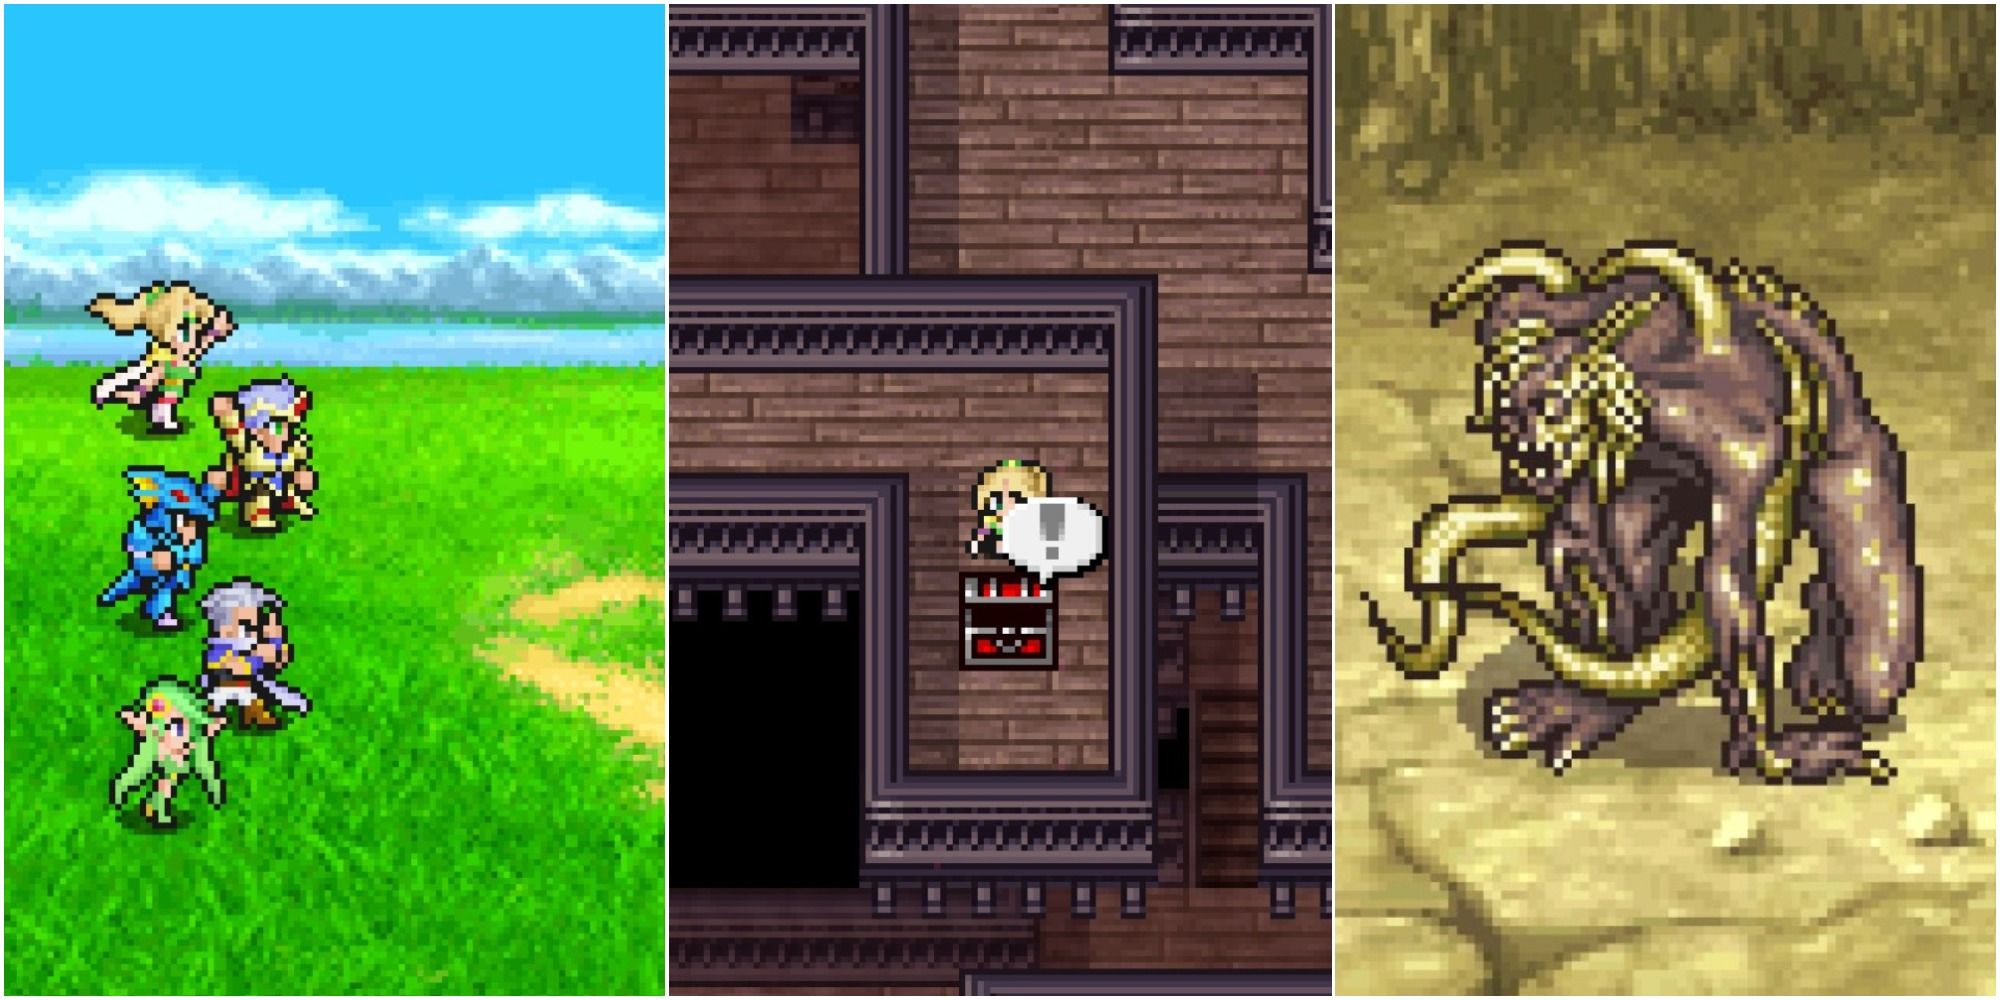 Final Fantasy IV -- To the Moon and Back